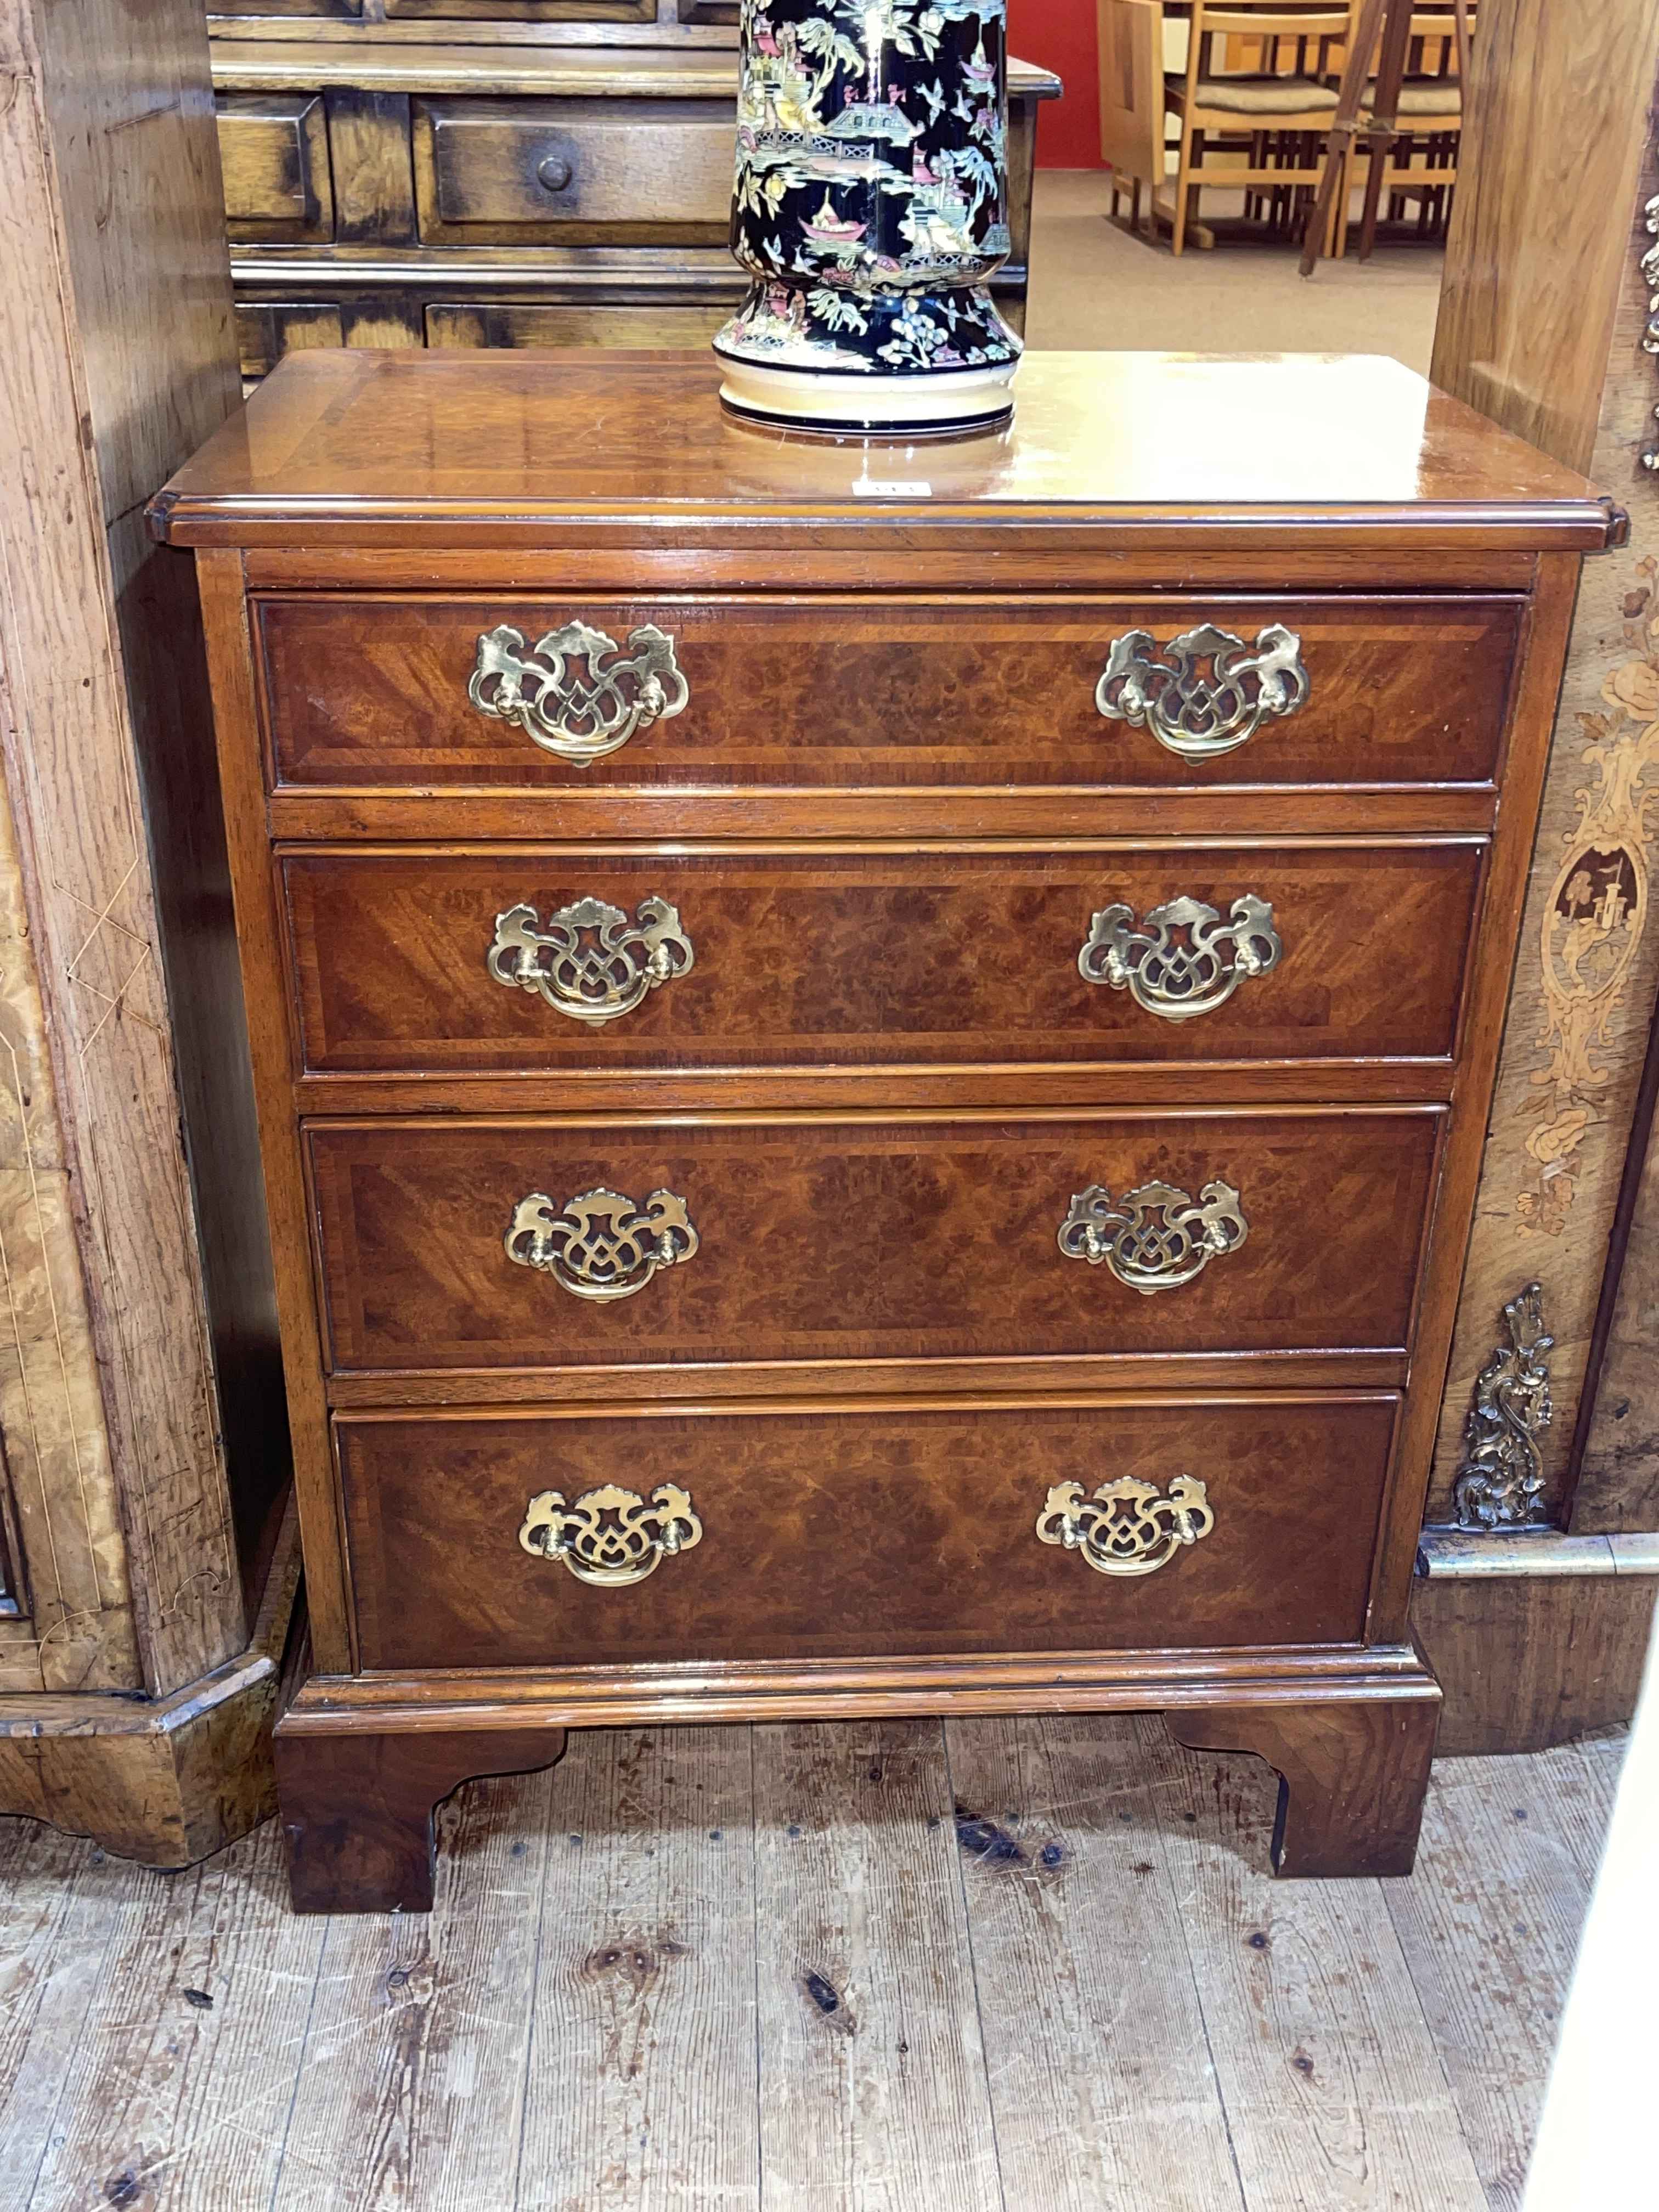 Ian Smith Reproductions inlaid burr wood four-drawer bachelors chest, 75cm by 61cm by 38cm.